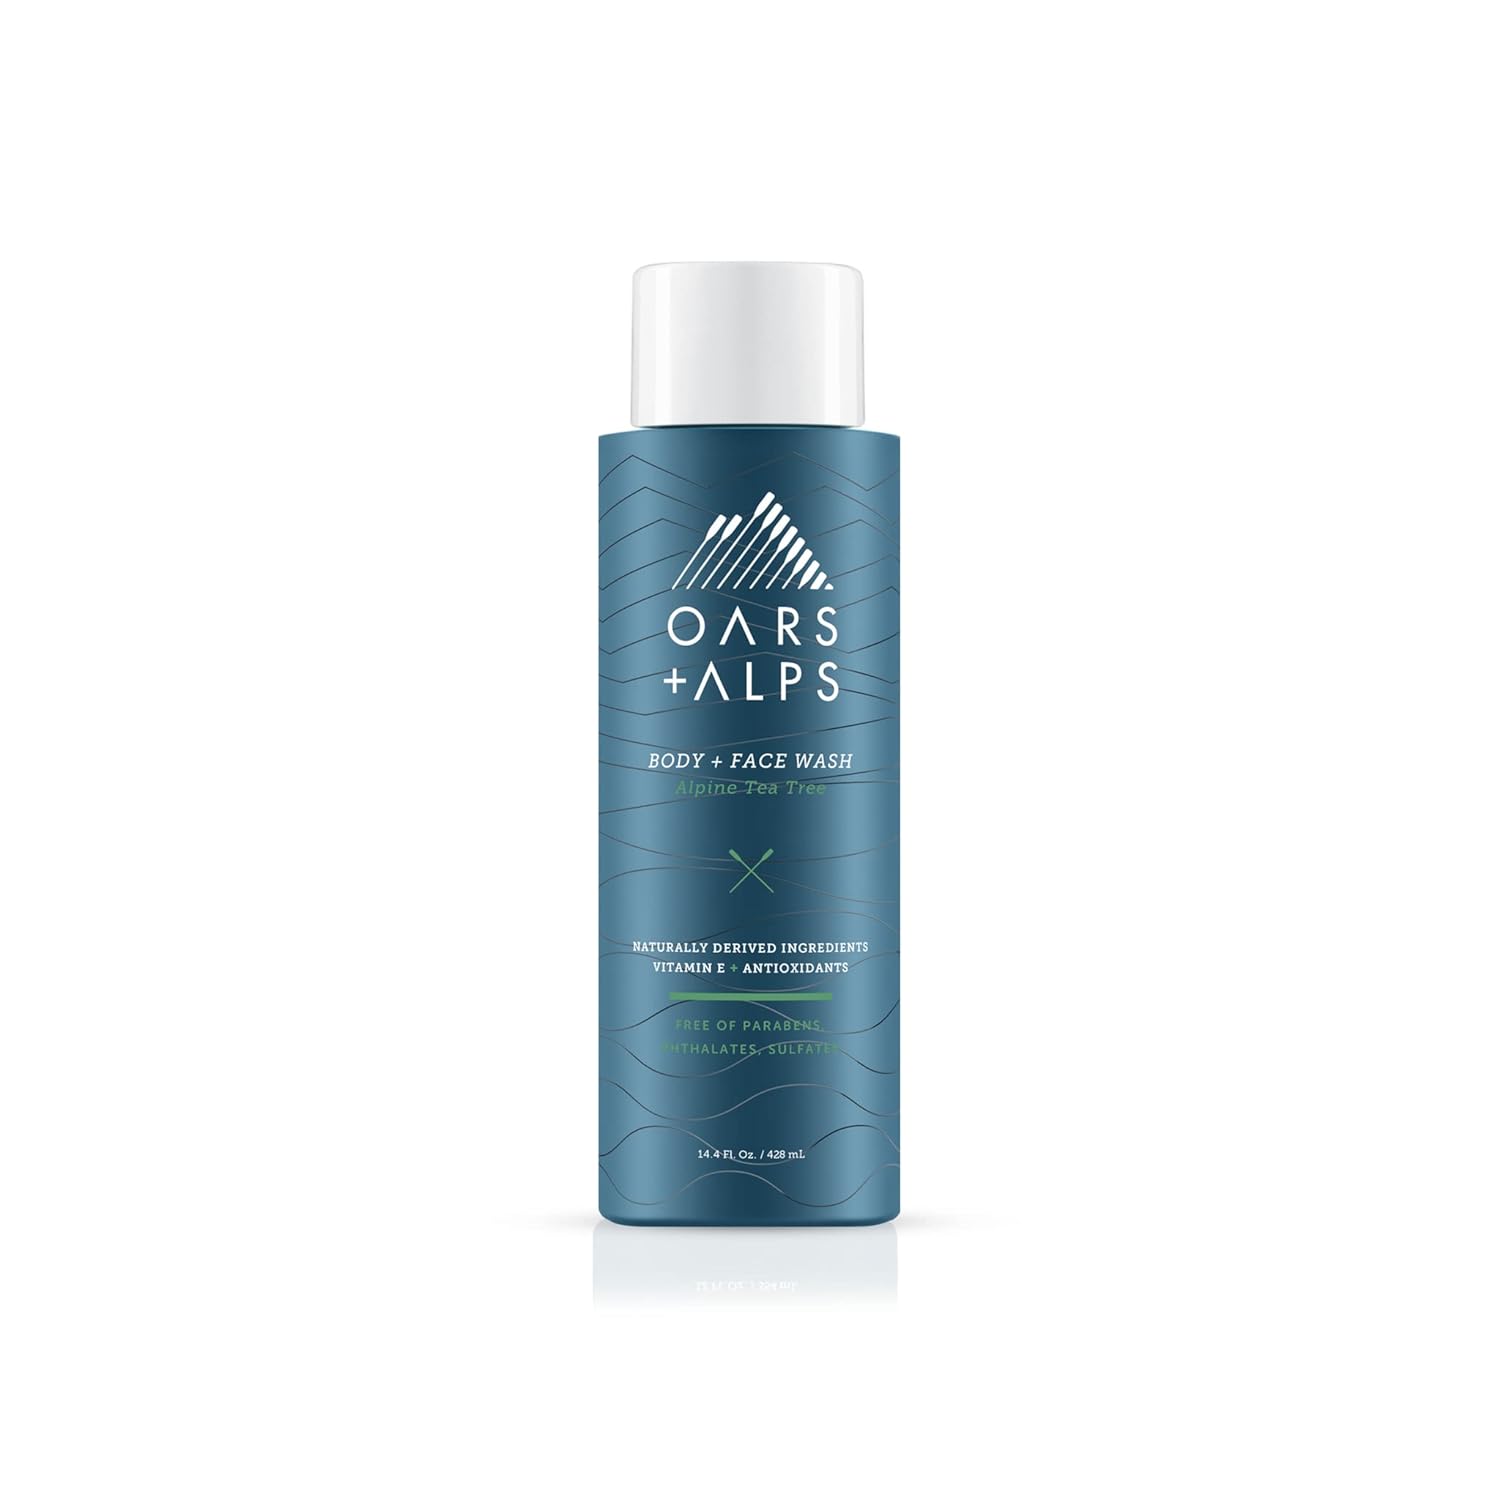 Oars + Alps Men's Moisturizing Body and Face Wash, Skin Care Infused with Vitamin E and Antioxidants, Sulfate Free, Alpine Tea Tree, 1 Pack